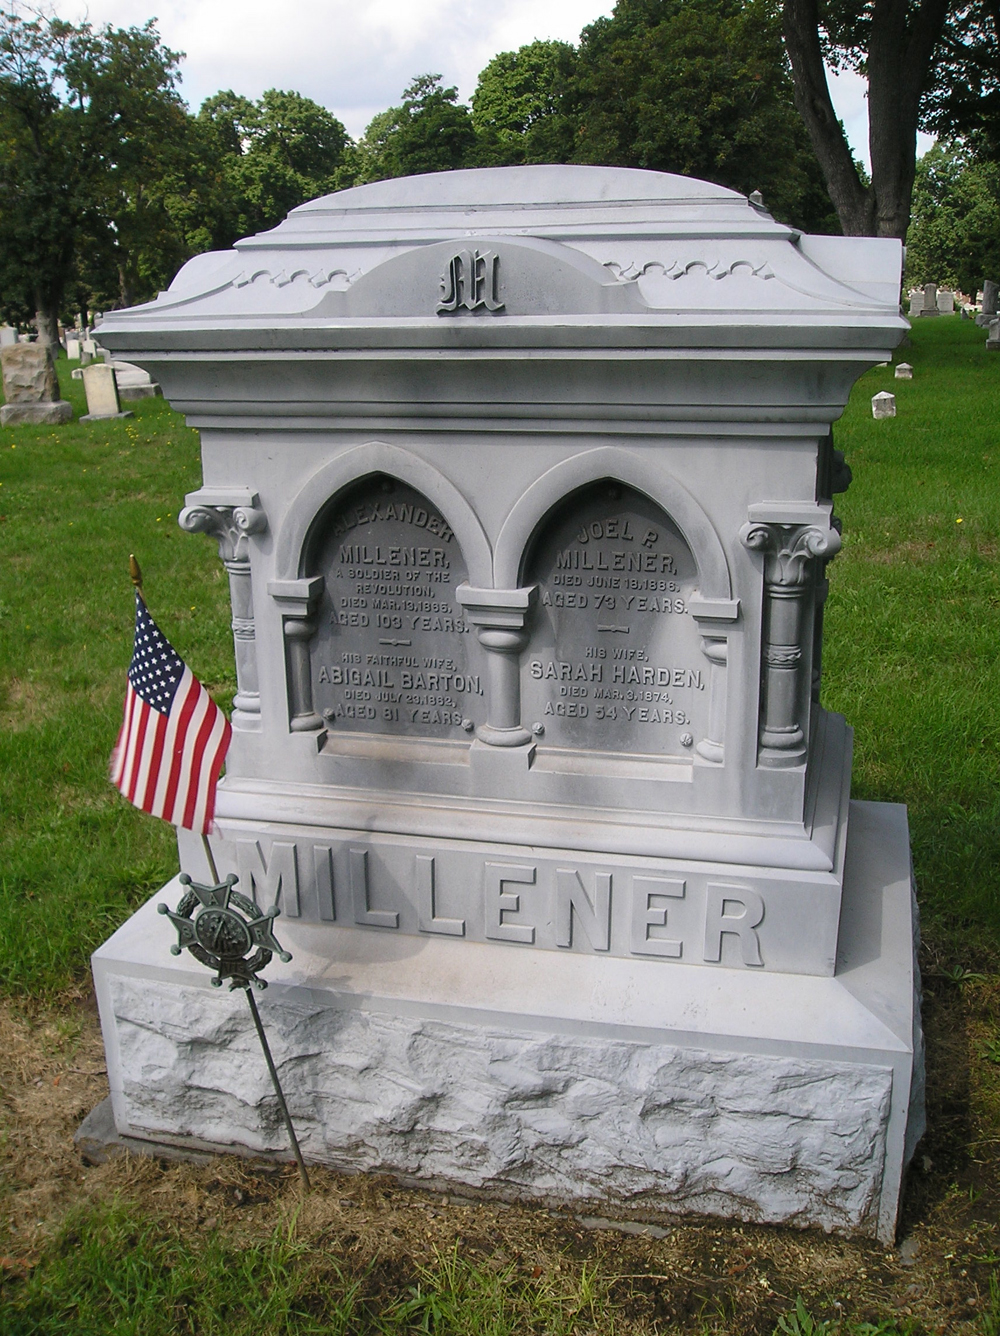 Monument to Alexander Millener, placed in Mt. Hope Cemetery in 1906